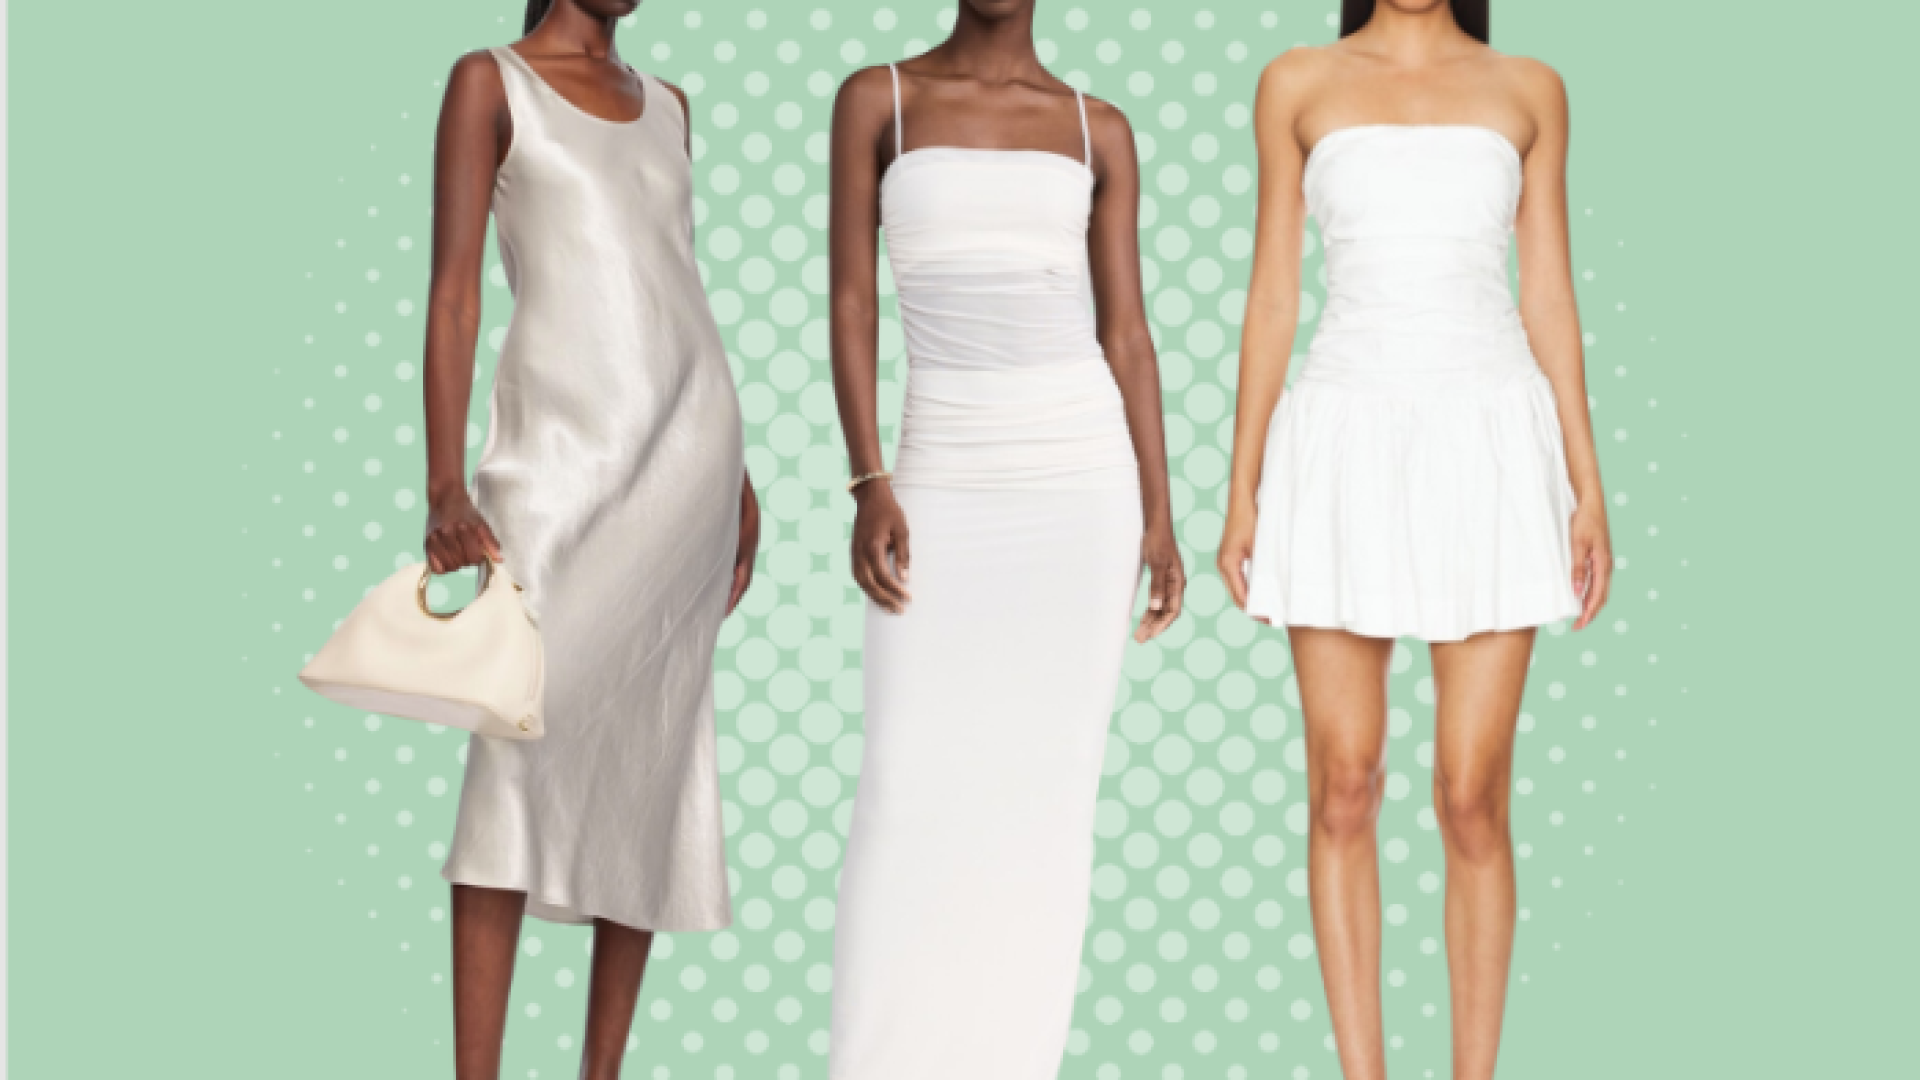 All-White Looks for Frankie Beverly and Maze's Final Essence Fest